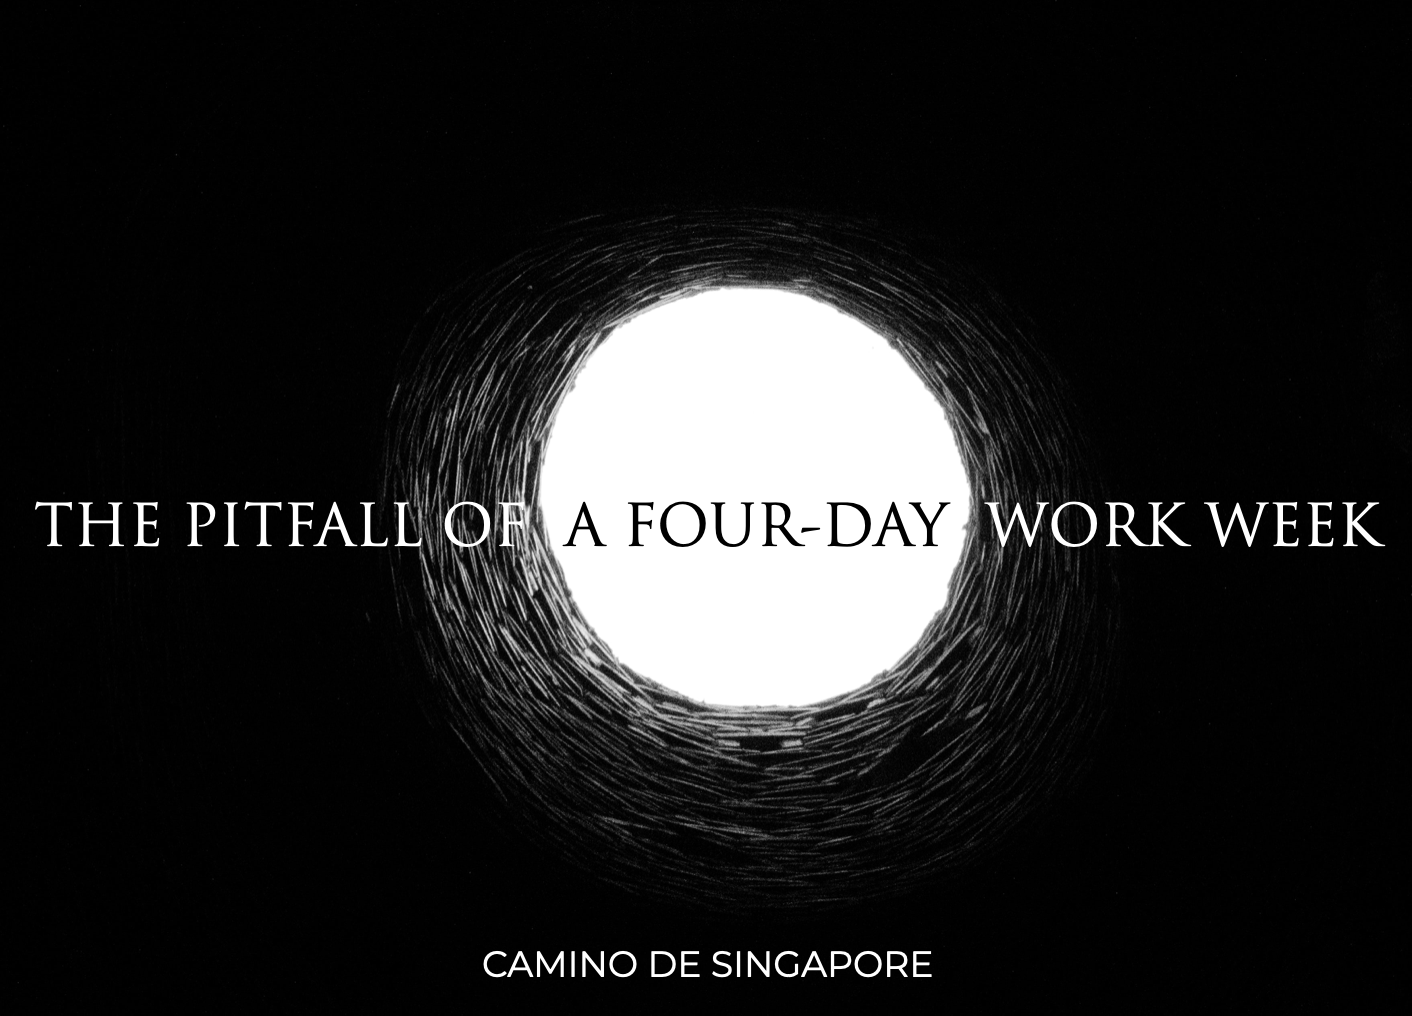 Camino De Singapore: The Pitfall Of A Four-day Work Week